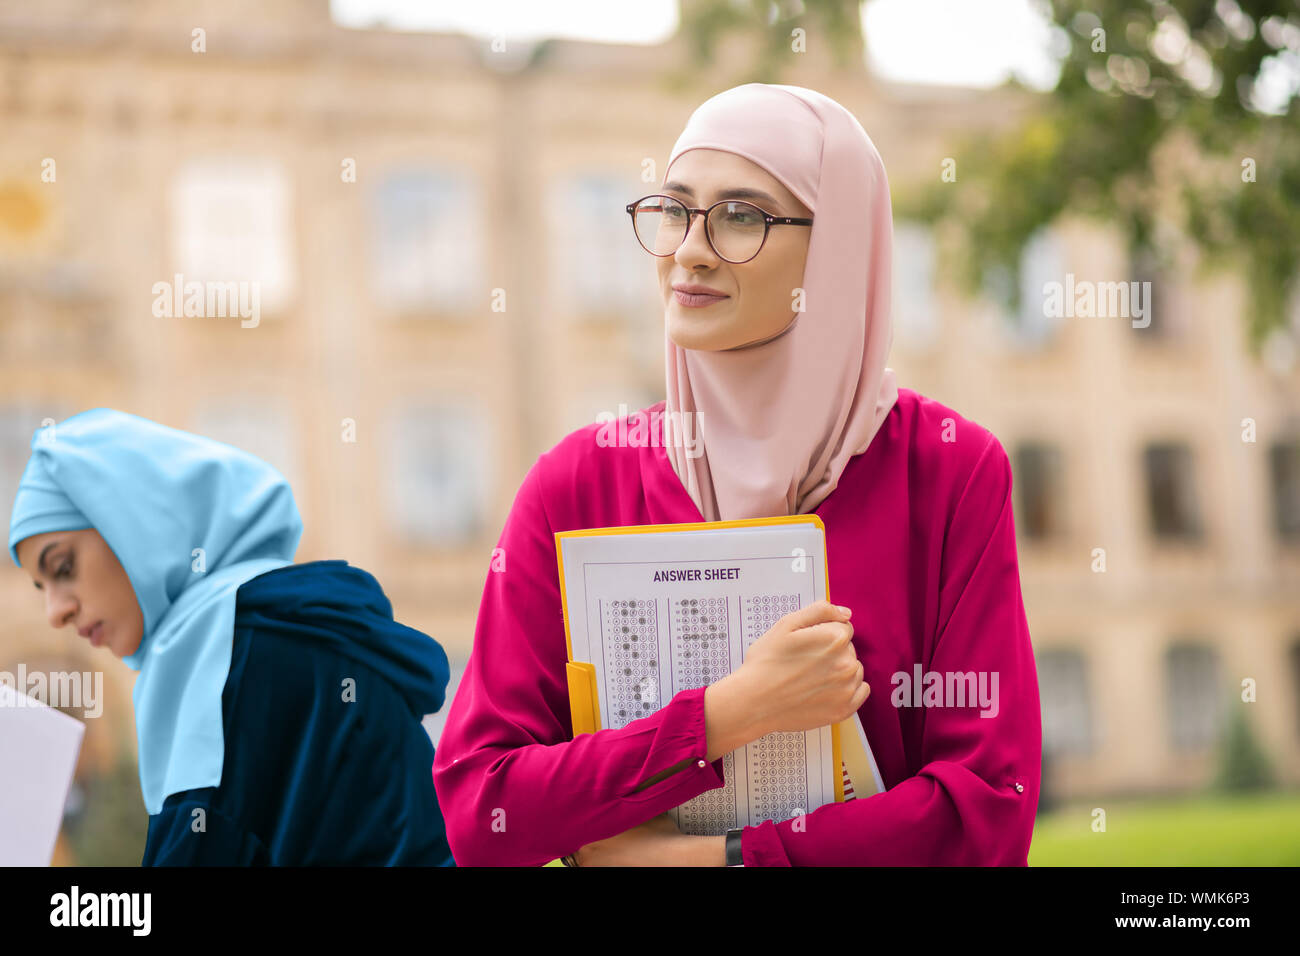 Appealing international student feeling motivated and excited Stock Photo